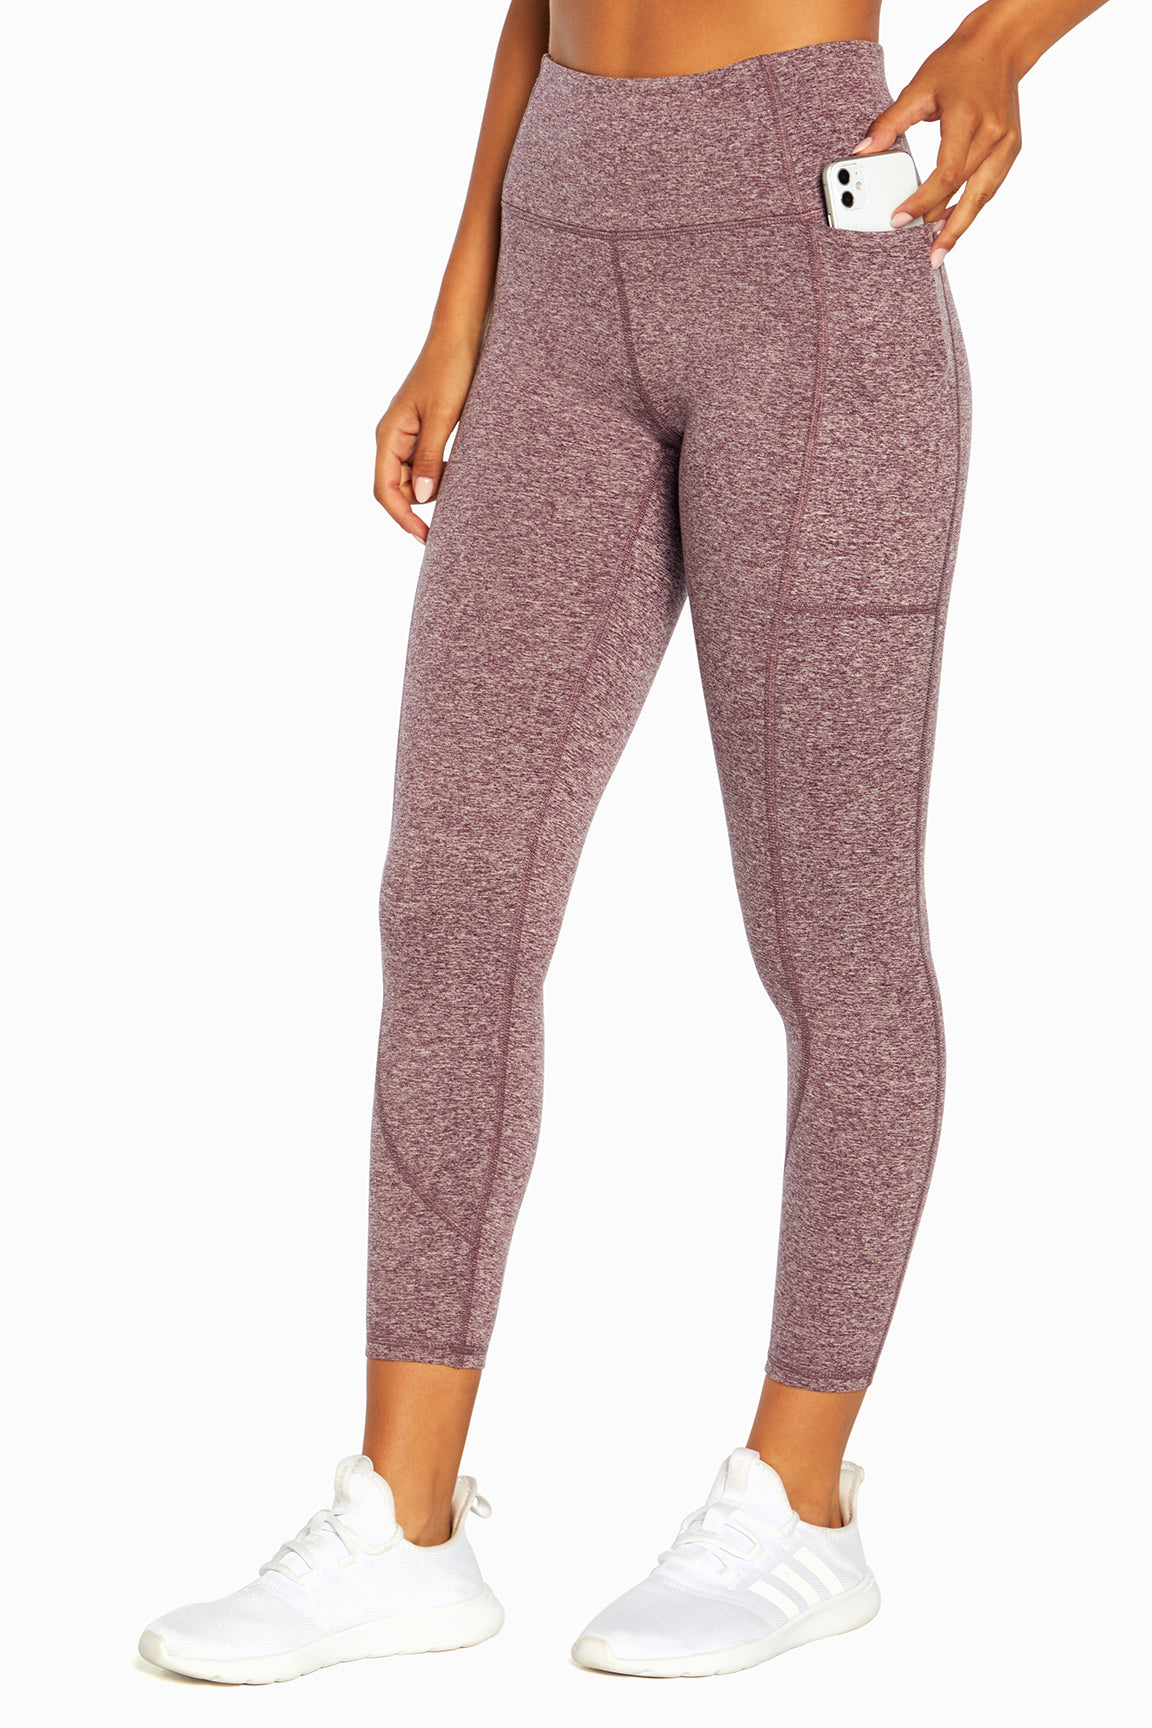 Marika Balance Collection Cropped Pocket Leggings Only $12.99 on Zulily.com  (Regularly $60)